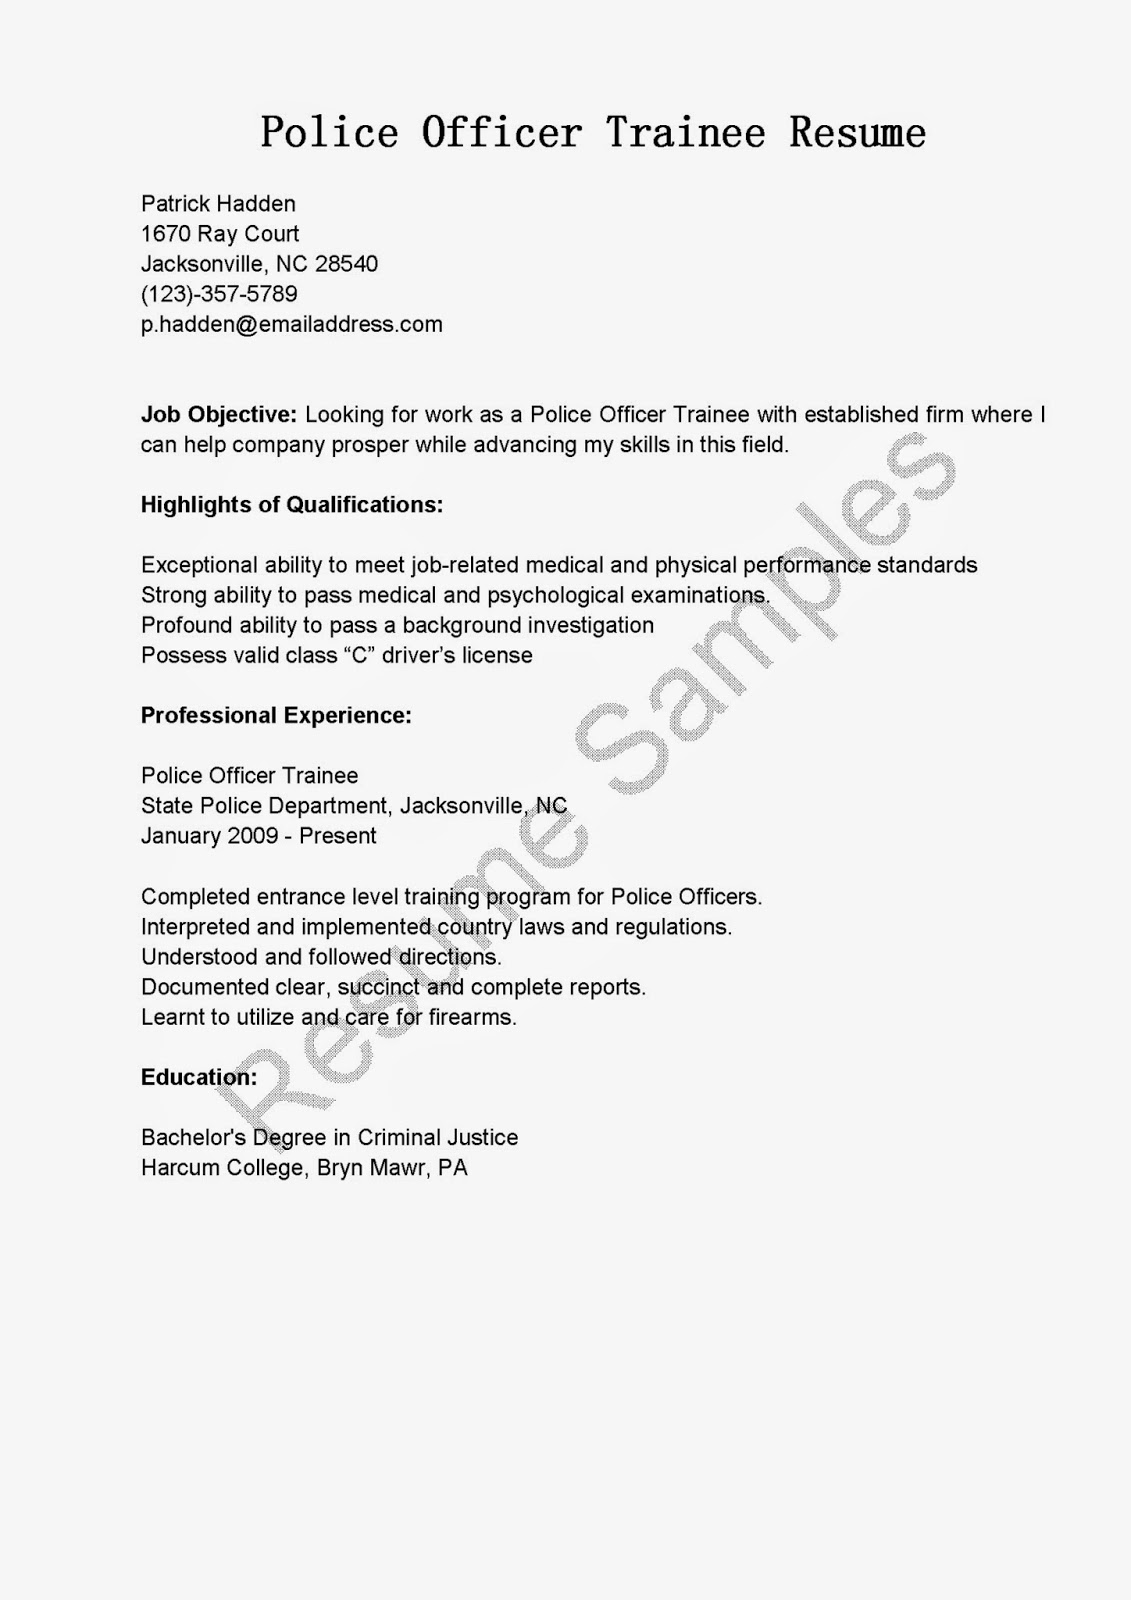 Objective section of resume for police officer